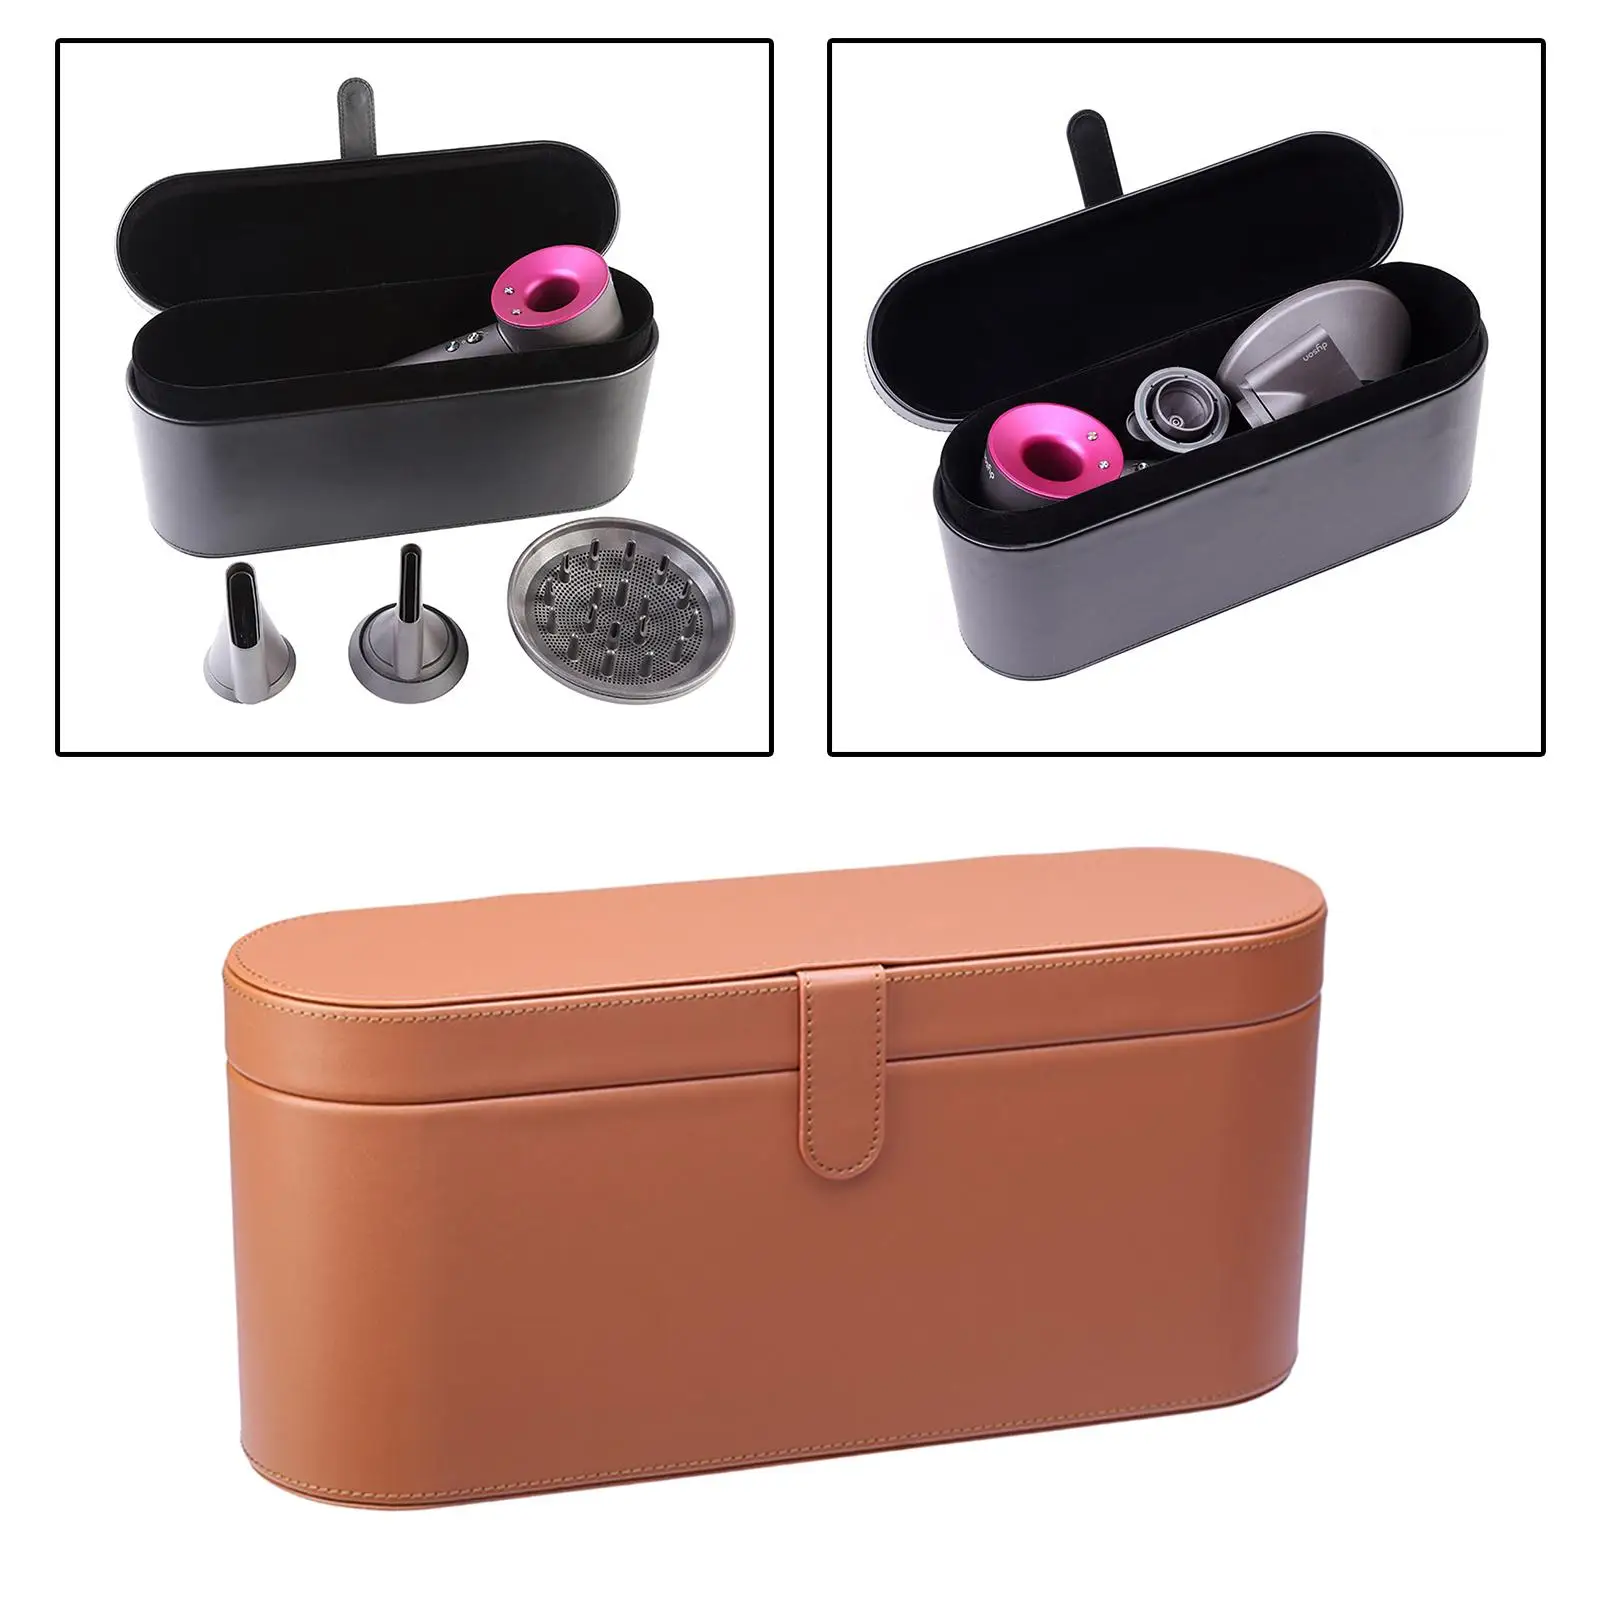 Portable PU Leather Travel Case Hair Dryer Storage Box HD03 Fits Hot Air Brush Accessories Magnetic Flip Organizer Carrier